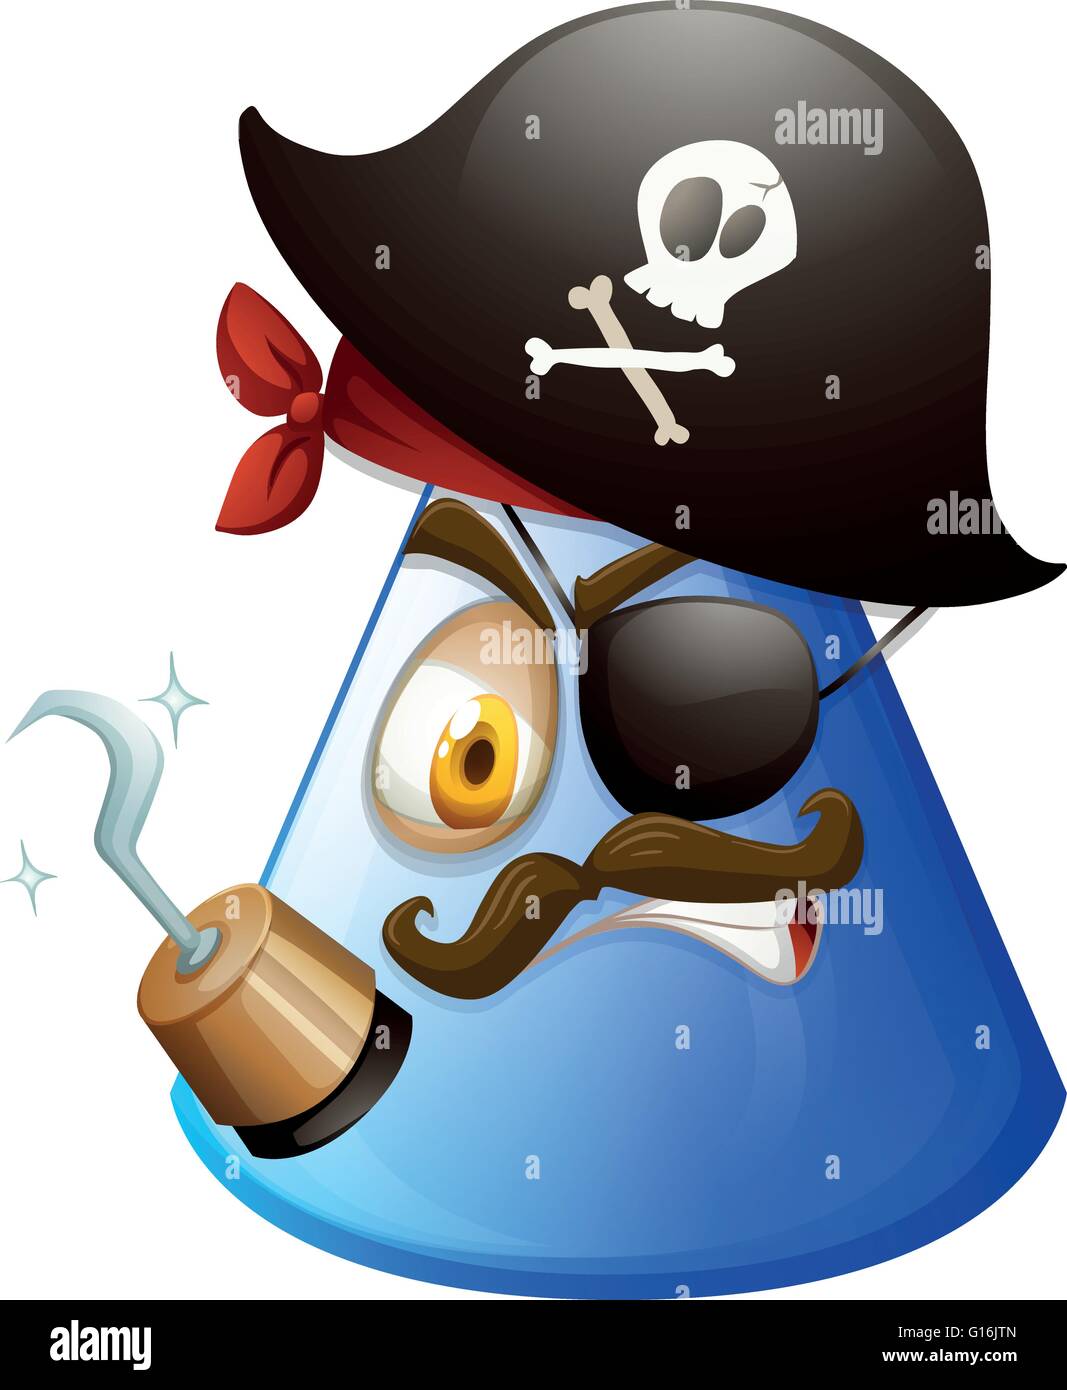 Pirate face on cone illustration Stock Vector